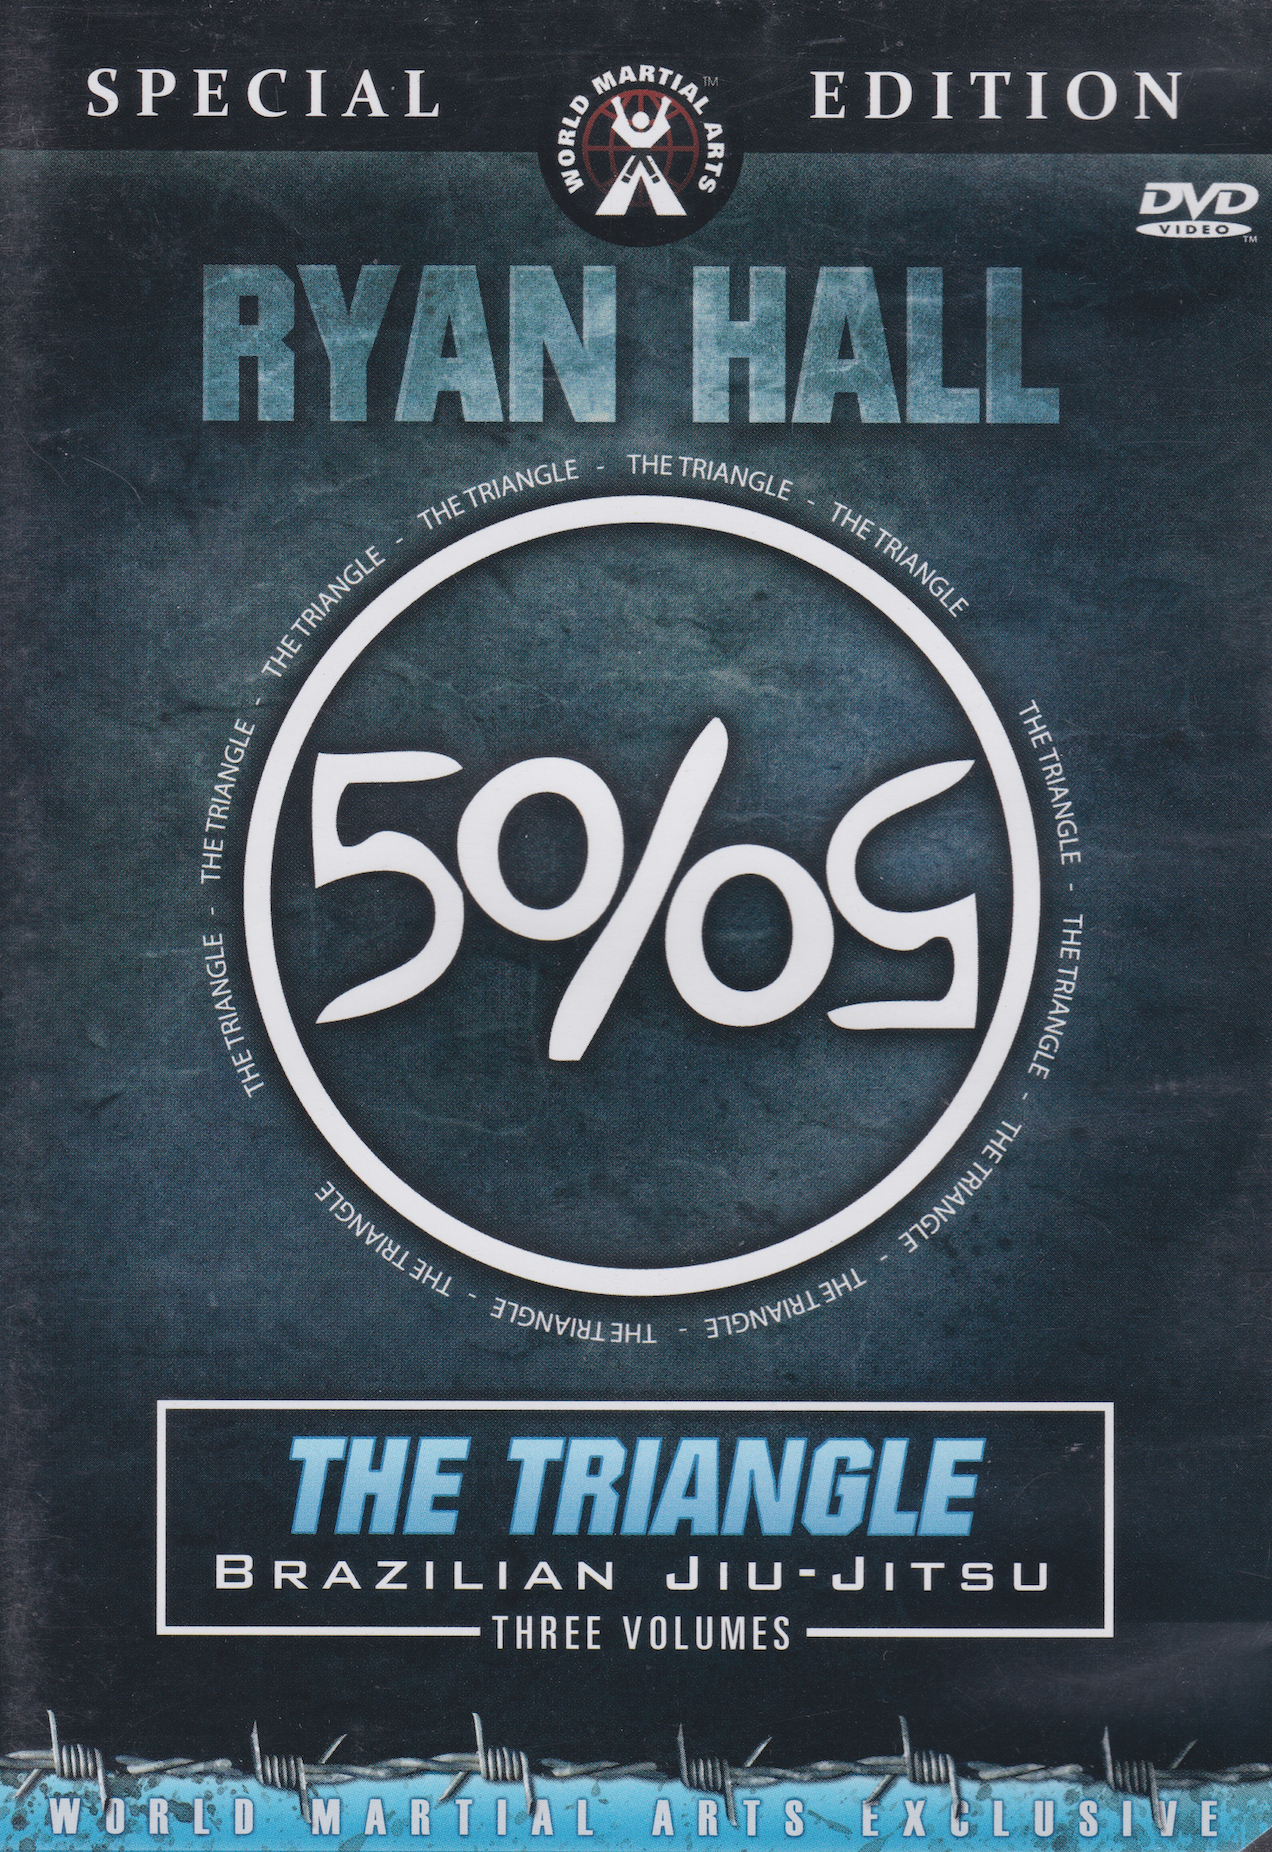 The Triangle 3 DVD Set with Ryan Hall (Preowned)